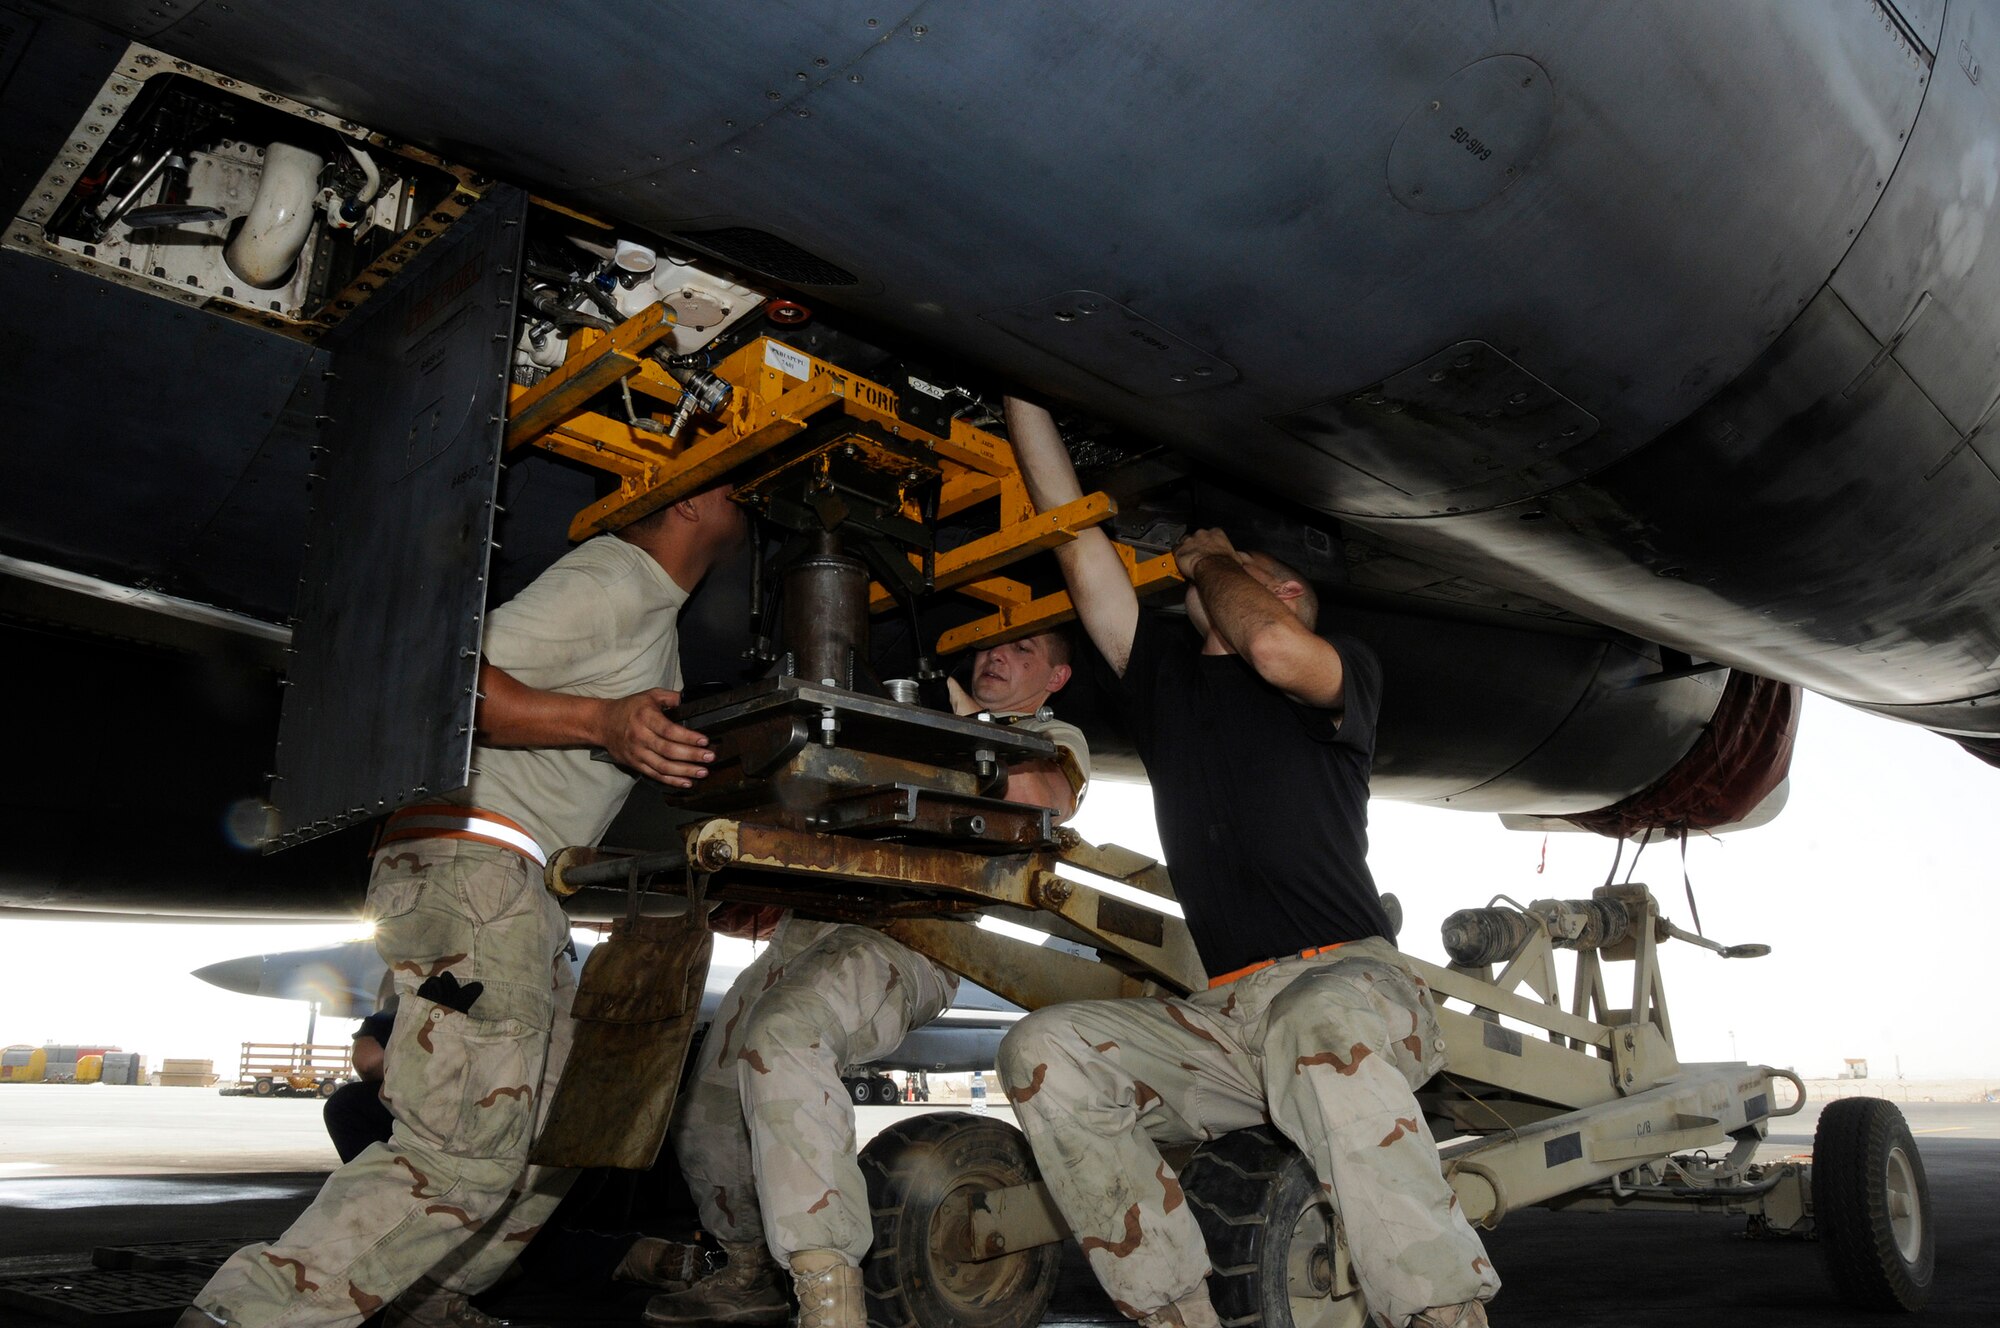 Airman 1st Class John Quintanila, Tech. Sgt. Matthew Boyer, and Staff Sgt. Andrew Grato, all assigned to the 379th Expeditionary Aircraft Maintenance Squadron, 34th Aircraft Maintenance Unit, position and lock an Auxiliary Power Unit into place Sept. 23, 2008.  The APU had to be replaced after an interior leak was discovered.  The work crew pulled the malfunctioning unit, prepared the replacement unit, and installed the new APU into a B-1 Lancer at this undisclosed air base in Southwest Asia.  Sergeant Grato is locking the unit into place as Airman Quintanila and Sergeant Boyer position the unit for installation.  The B-1, with long loiter times, massive payload, speed and precision weapons capabilities, provides valuable close air support to ground combatants engaged in Operations Iraqi and Enduring Freedom.  Sergeant Boyer hails from Saint Louis, Mo., Sgt. Grato from Saugus, Mass. and Airman Quintanila from Agat, Guam.  All are deployed from Ellsworth Air Force Base, S.D.  (U.S. Air Force photo by Tech. Sgt. Michael Boquette/Released)